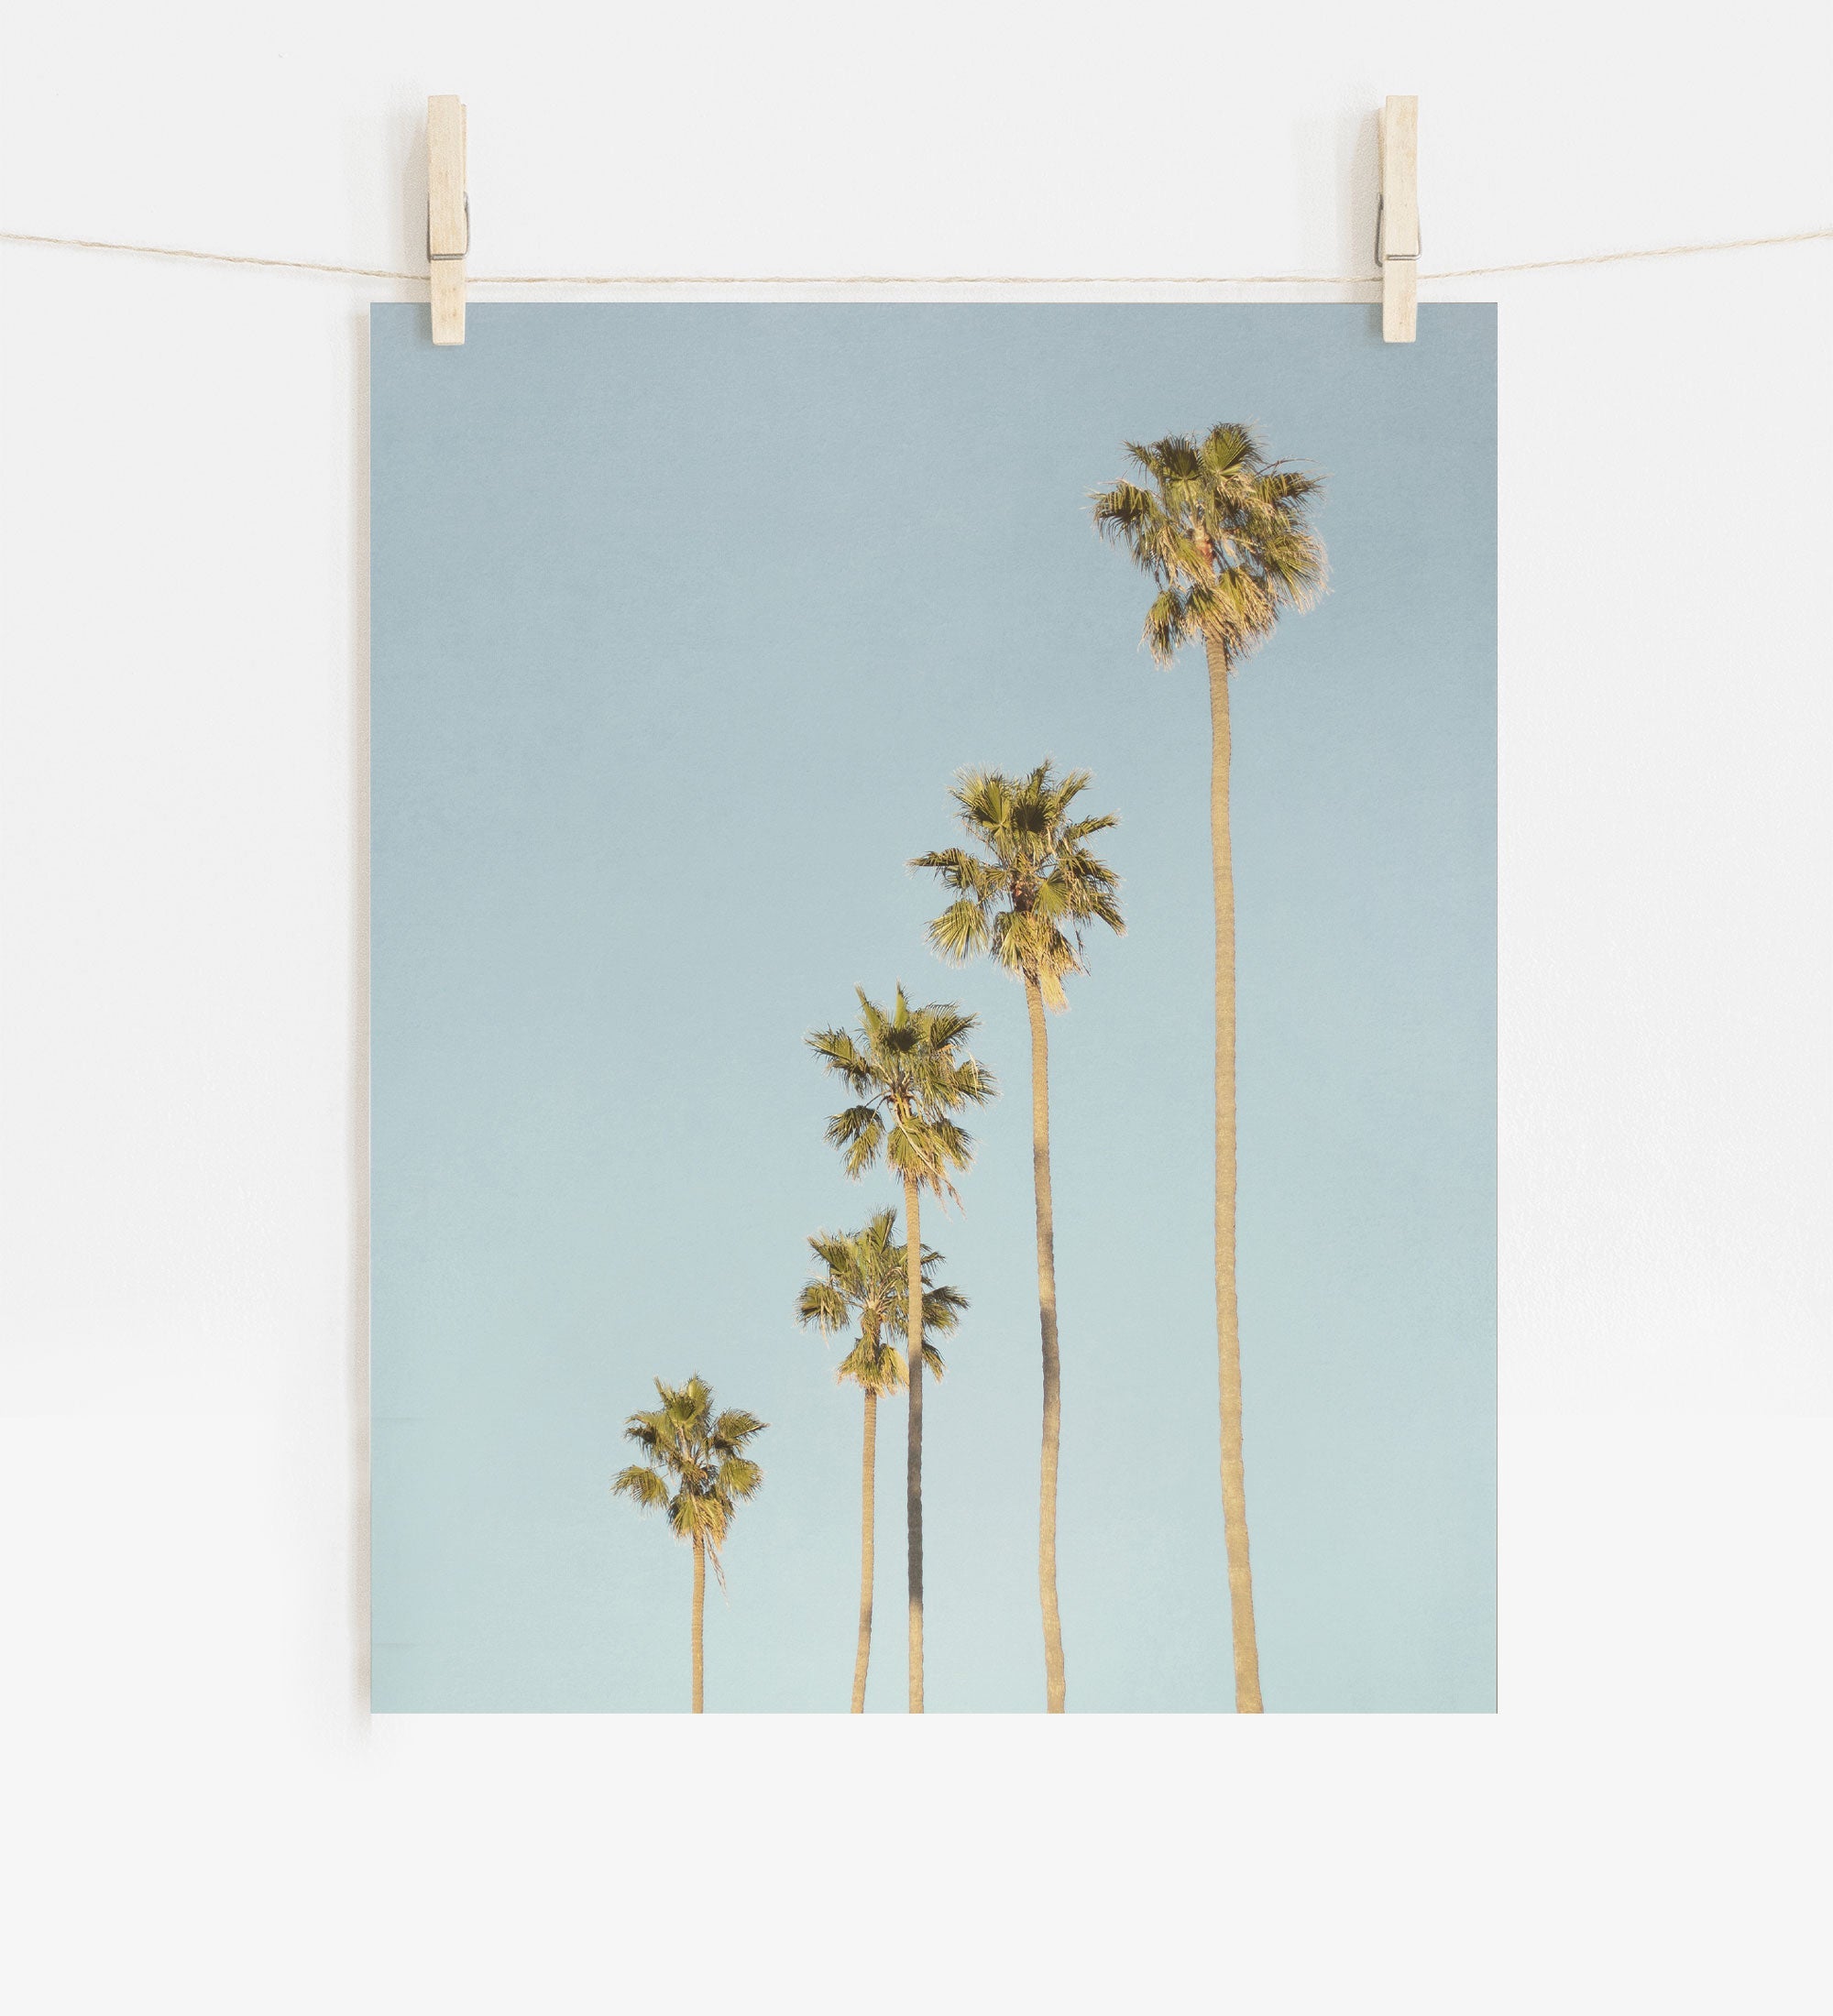 A photo of tall palm trees against a blue sky, clipped to a string with two wooden clothespins in California style, suggesting the image is hanging for display is the Offley Green Los Angeles Palm Tree Photographic Print &#39;Palm Tree Steps&#39;.